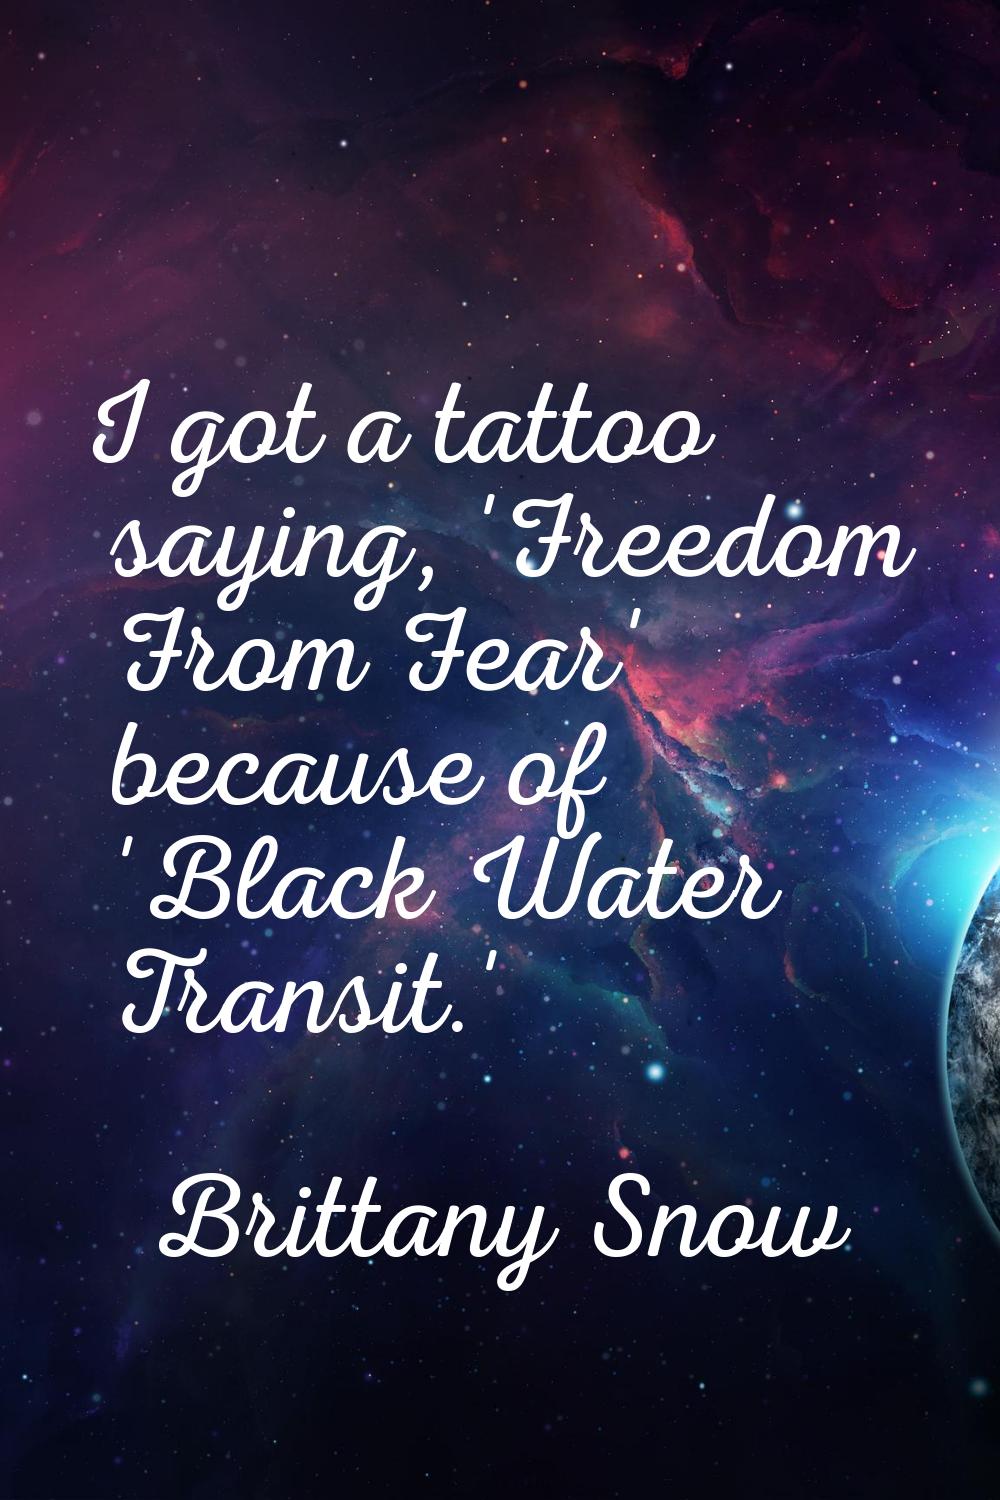 I got a tattoo saying, 'Freedom From Fear' because of 'Black Water Transit.'